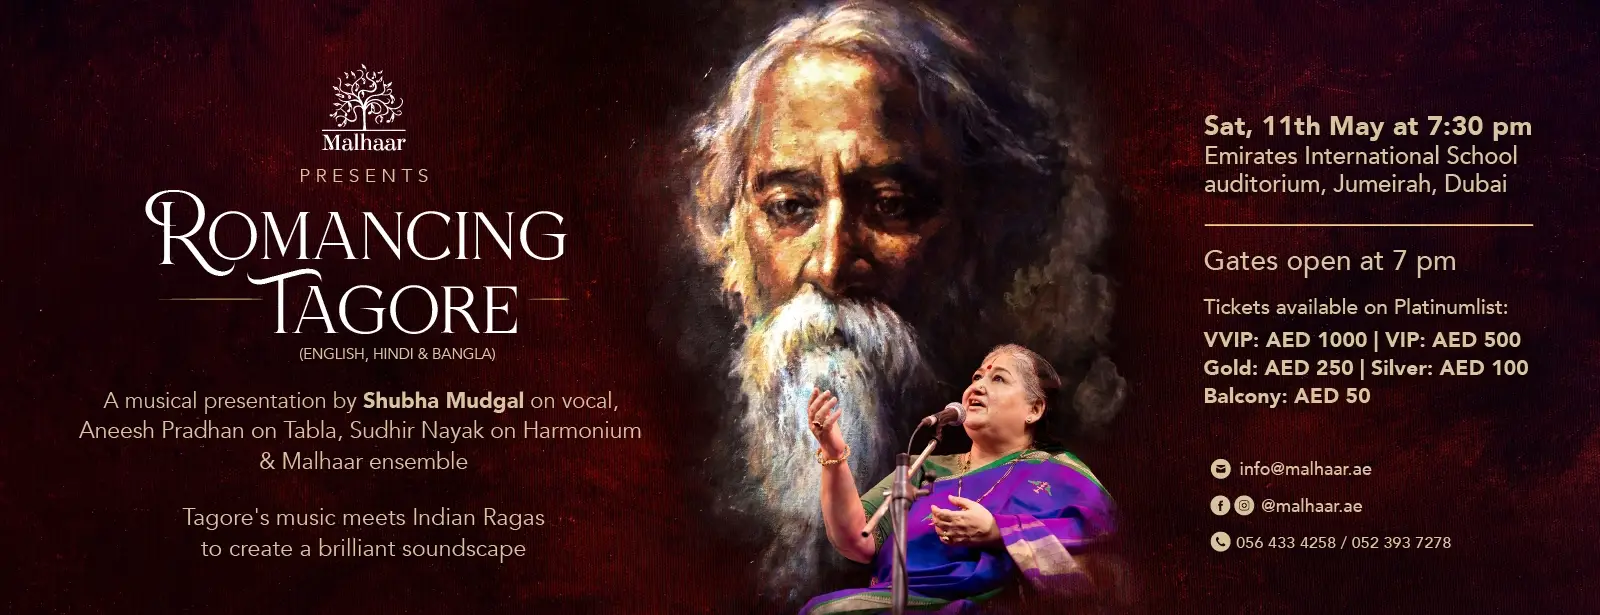 Romancing Tagore Featuring Shubha Mudgal Live in Dubai || Wow-Emirates